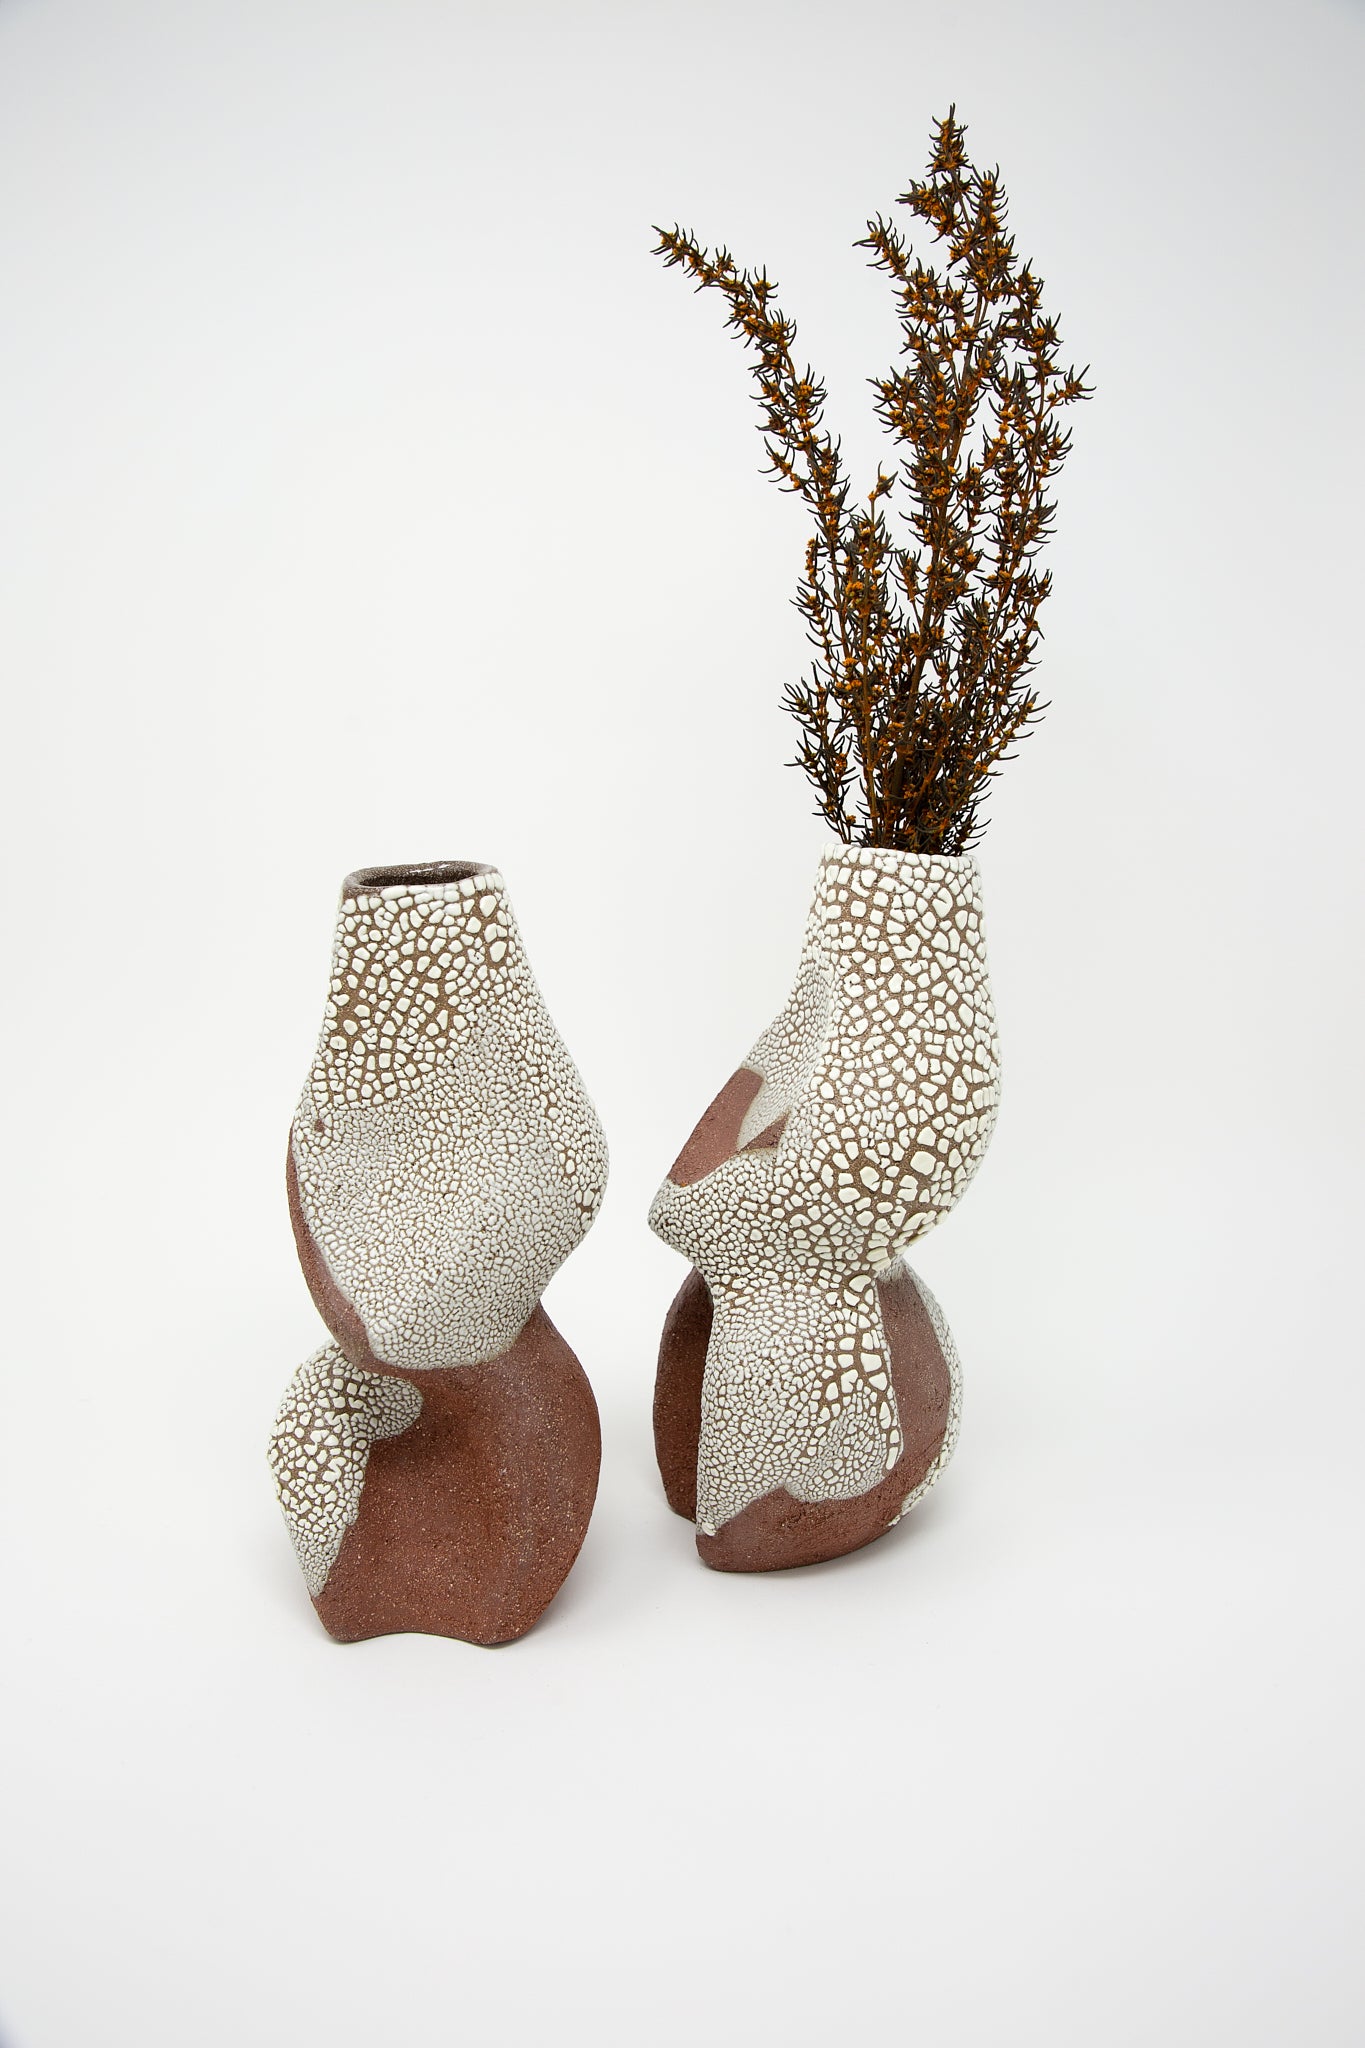 A pair of Lost Quarry Hand Built Vessel No. 000743 Bud Vases with brown and white speckled designs.